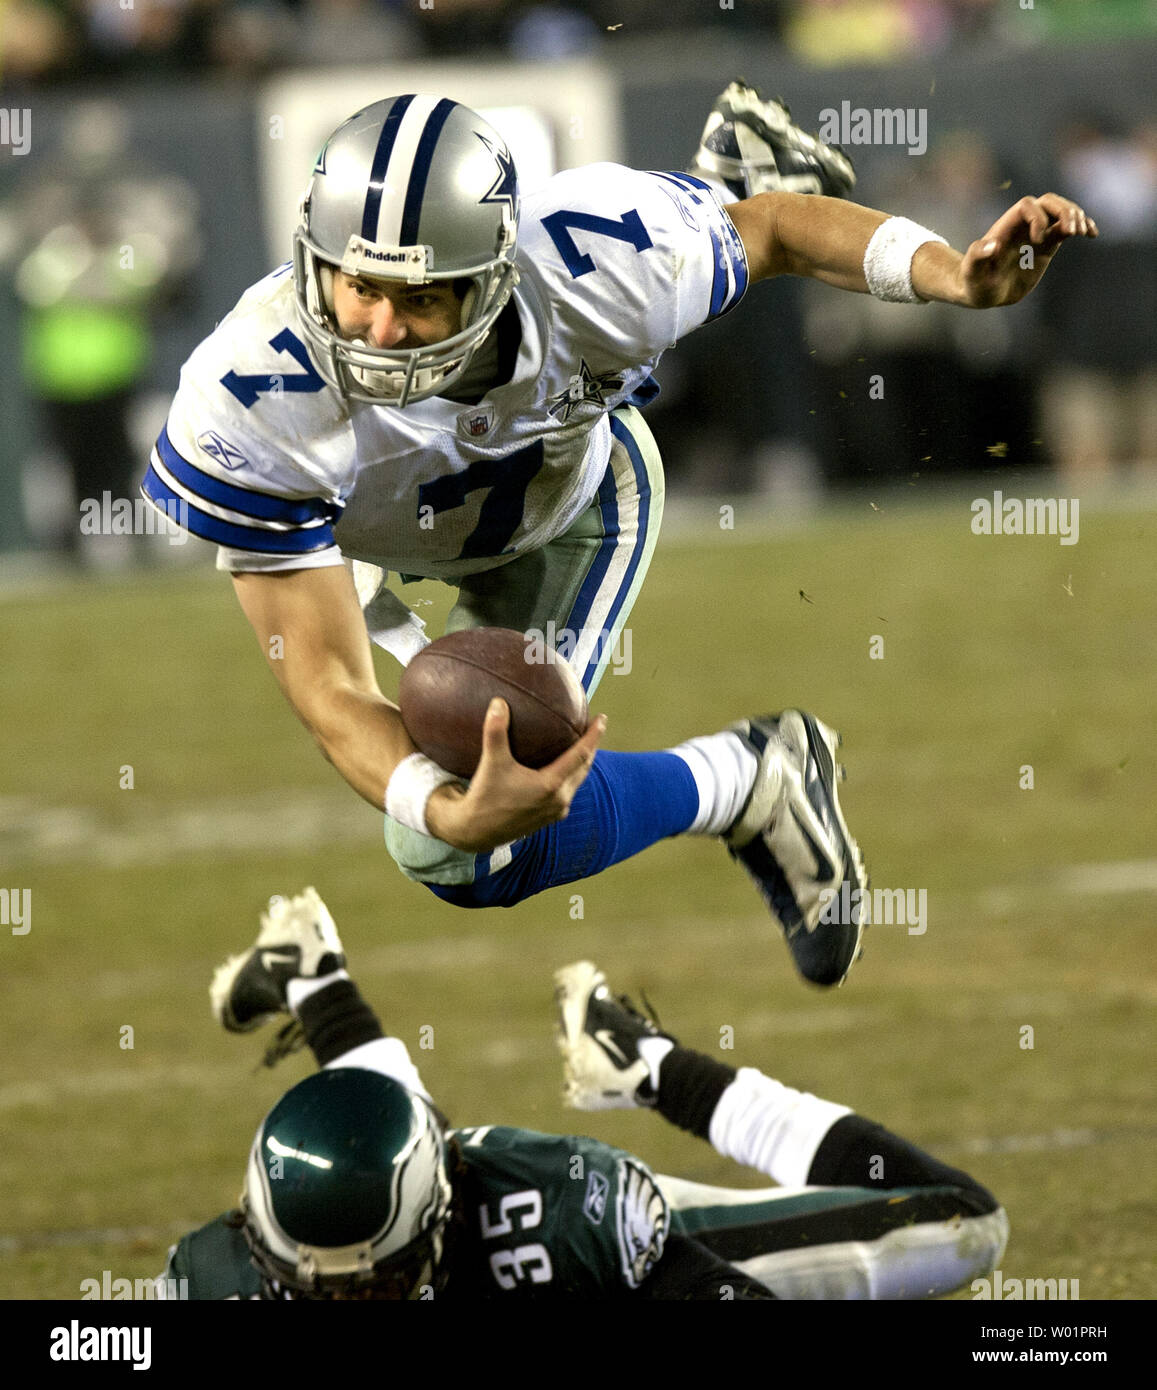 Dallas Cowboys quarterback Stephen McGee sails through the air over Philadelphia Eagles cornerback Trevard Lindley after Lindley tripped him up trying to tackle him in fourth quarter Philadelphia Eagles-Dallas Cowboys game action in Philadelphia at Lincoln Financial Field January 2, 2011. McGee gained 14-yards on the play.      UPI/John Anderson Stock Photo